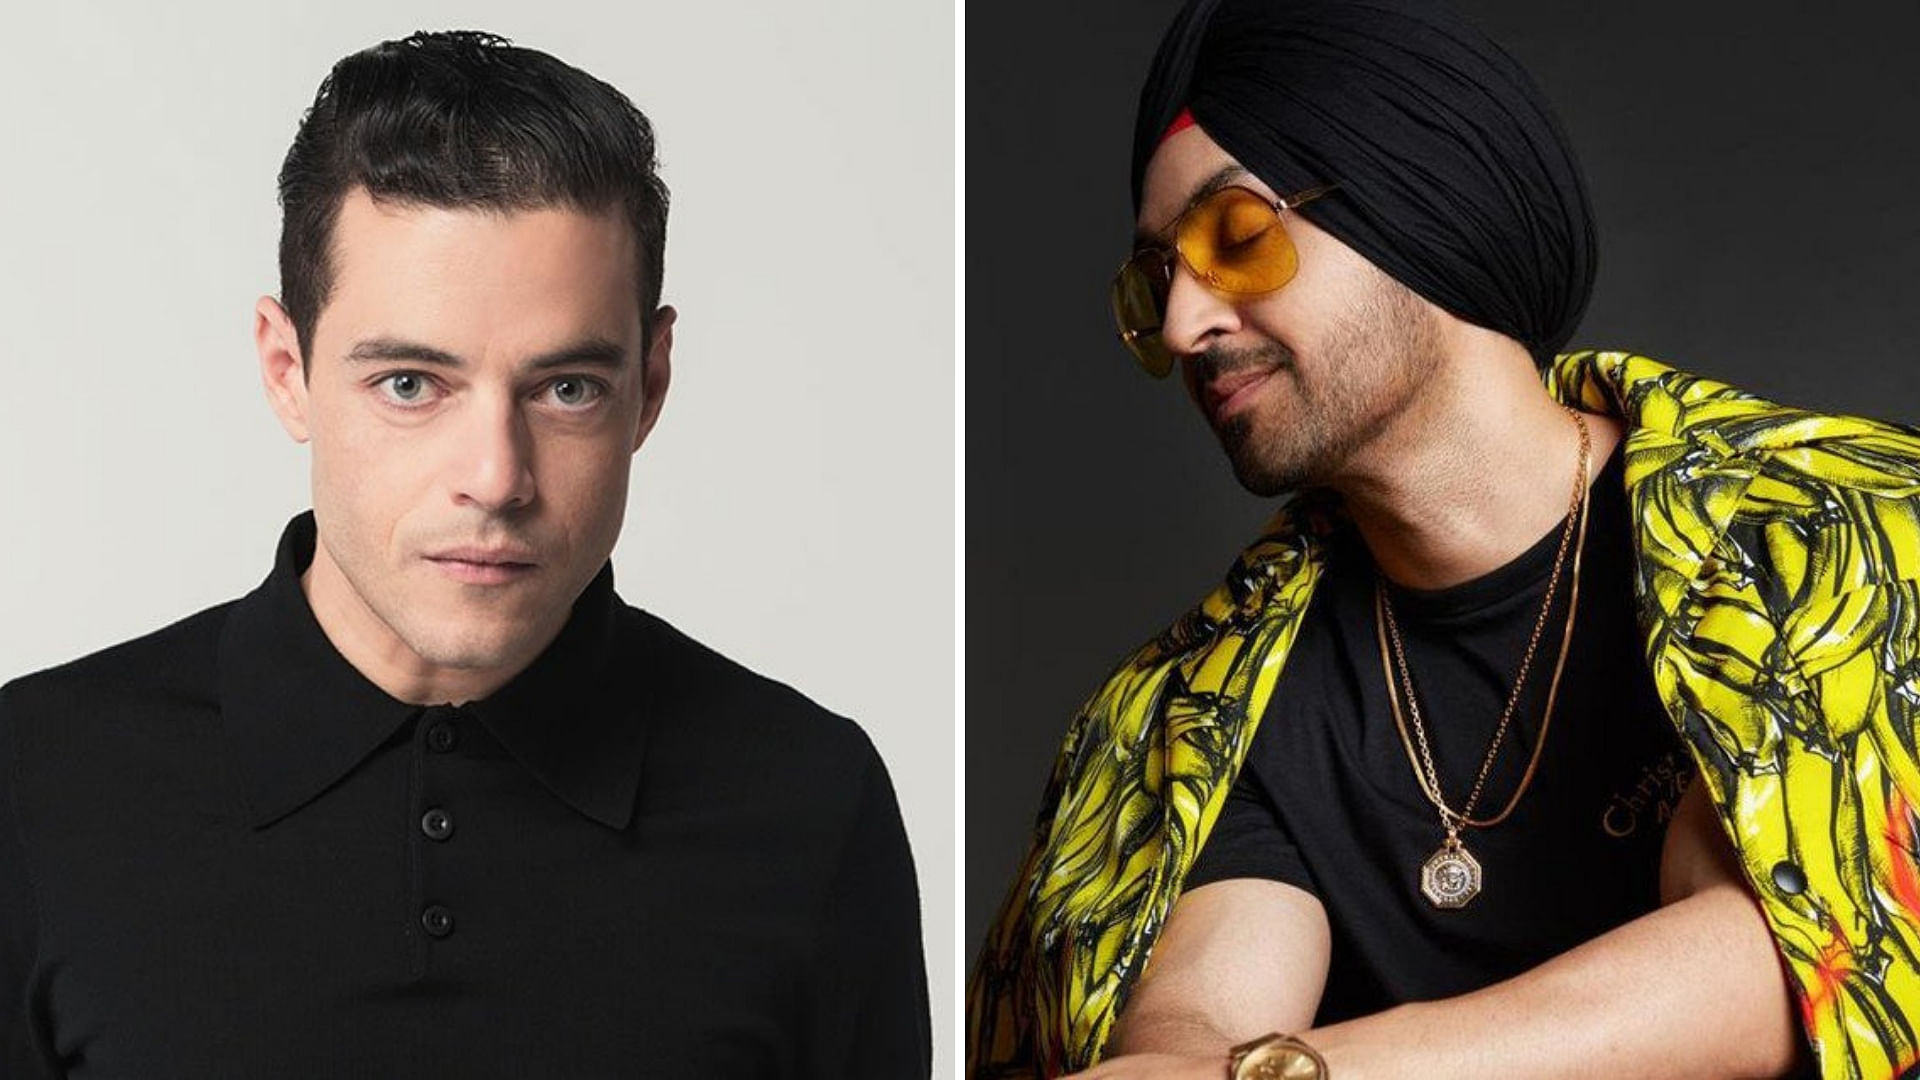 Rami Malek has joined the latest Bond film; Diljit Dosanjh has released a new track.